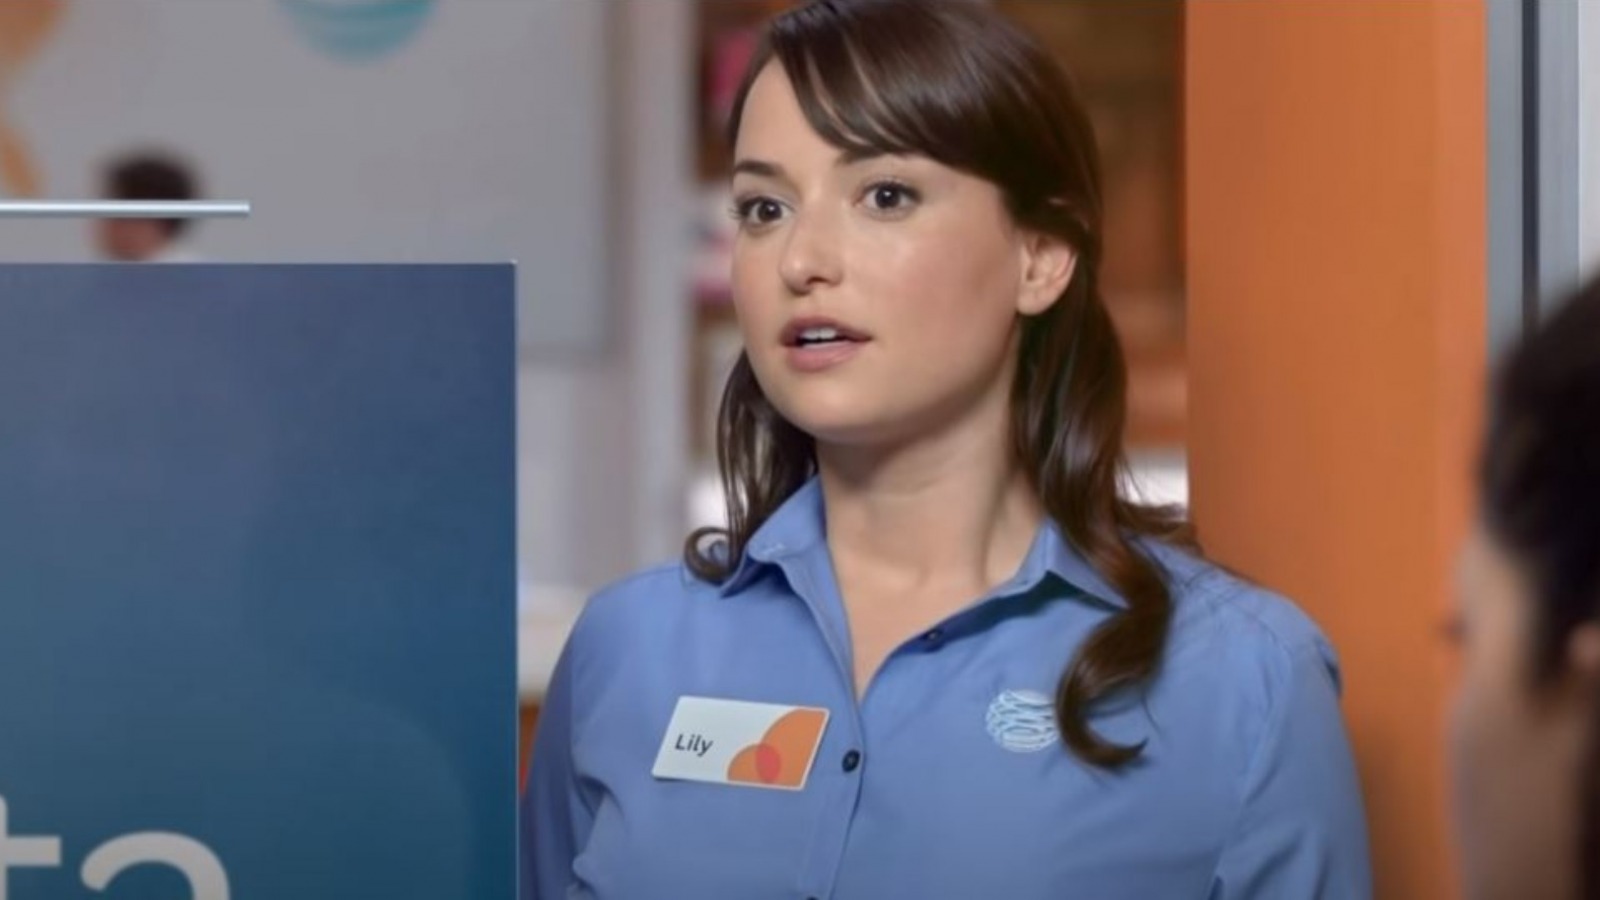 dalton wilkinson recommends hot chick in at&t commercial pic